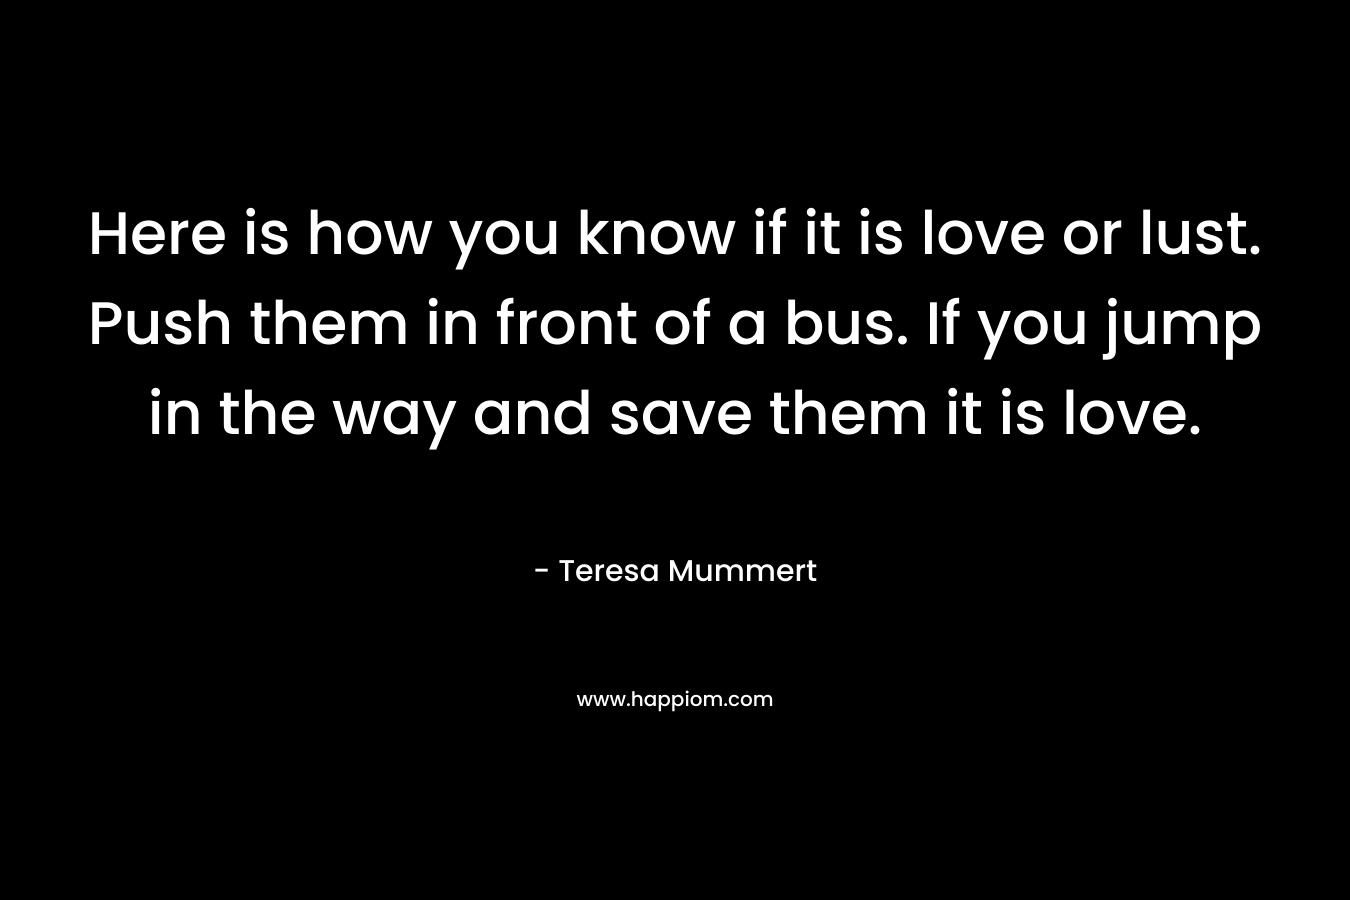 Here is how you know if it is love or lust. Push them in front of a bus. If you jump in the way and save them it is love.